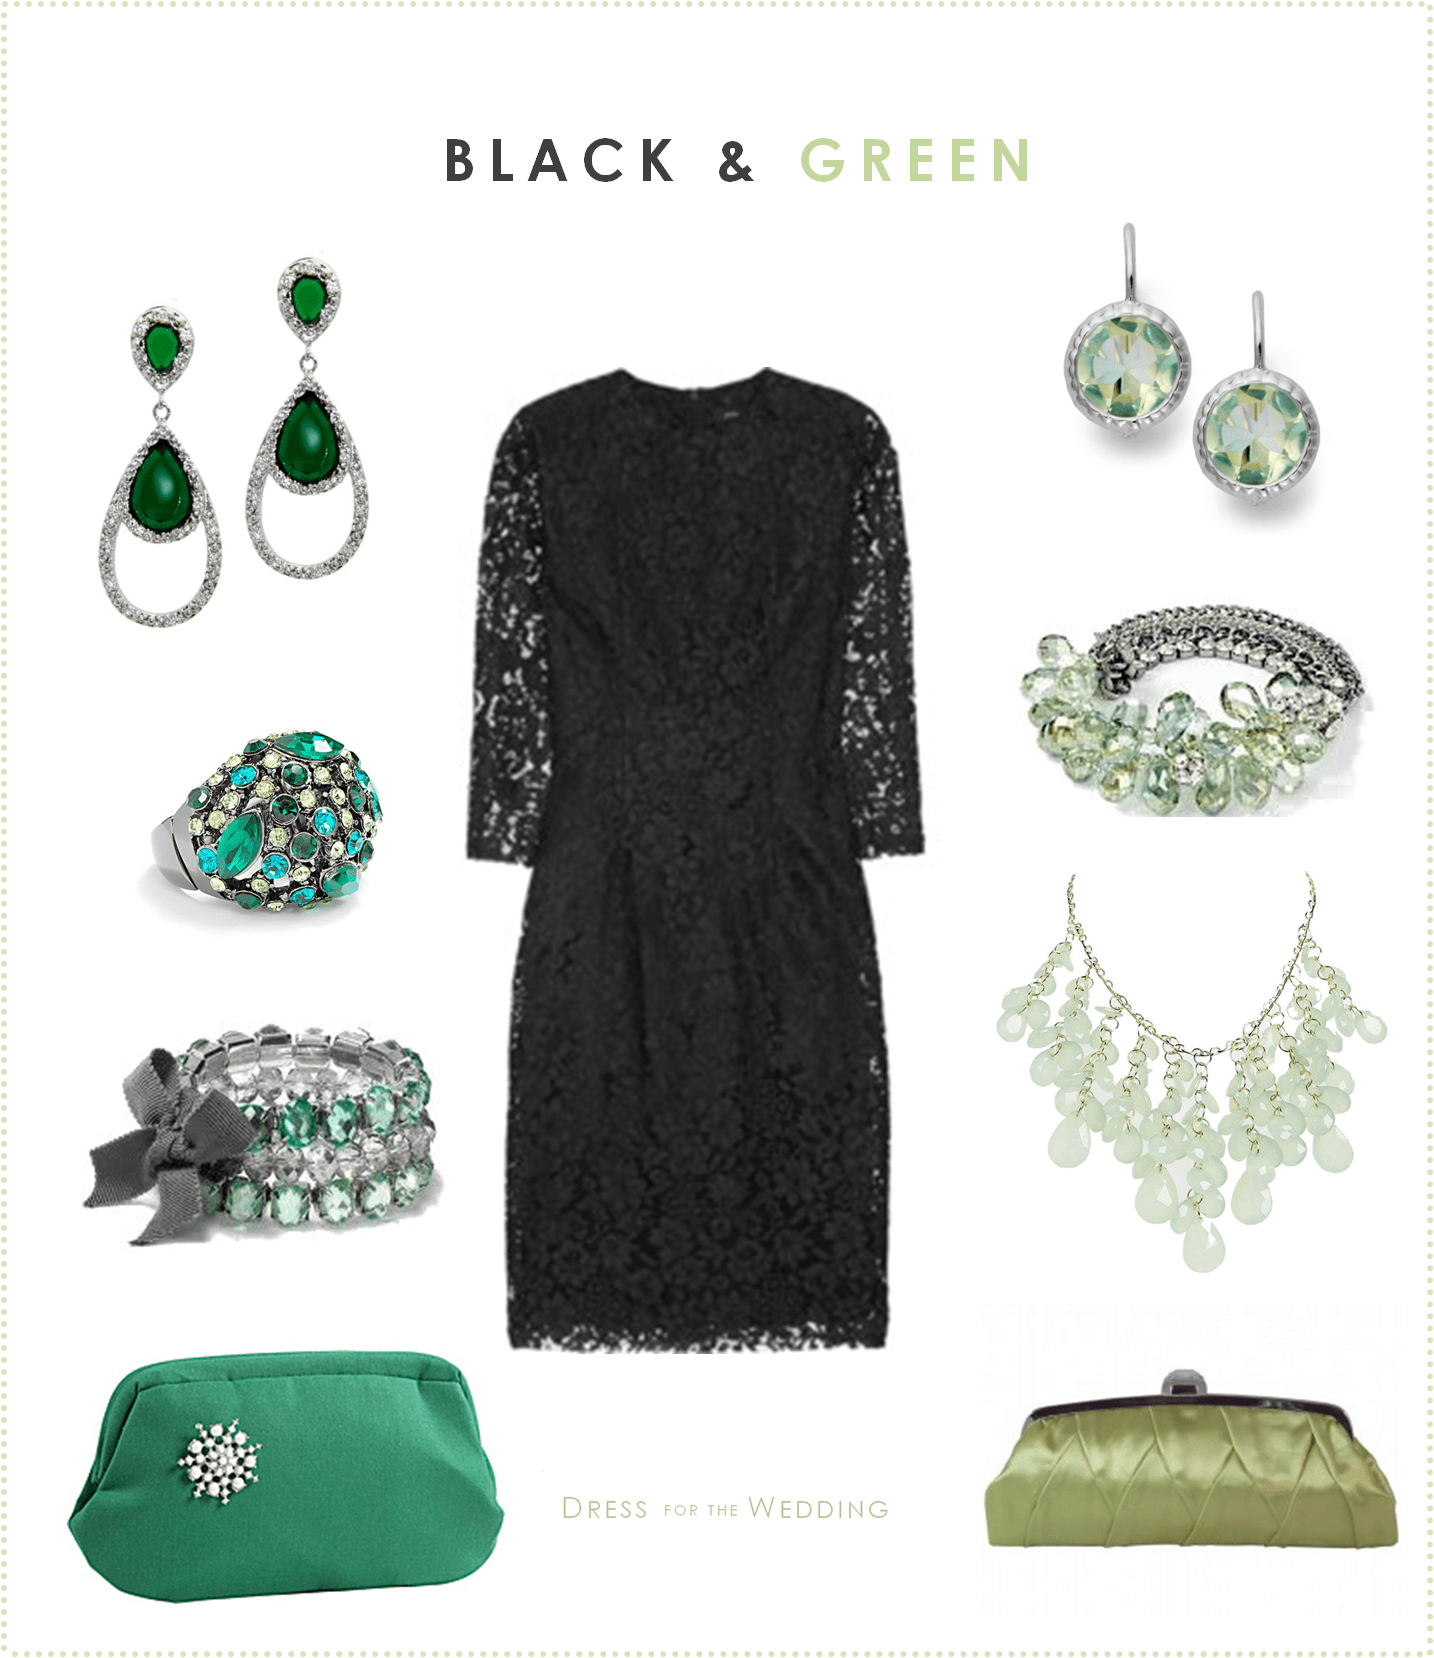 Black Dress and Green Accessories | Dress for the Wedding